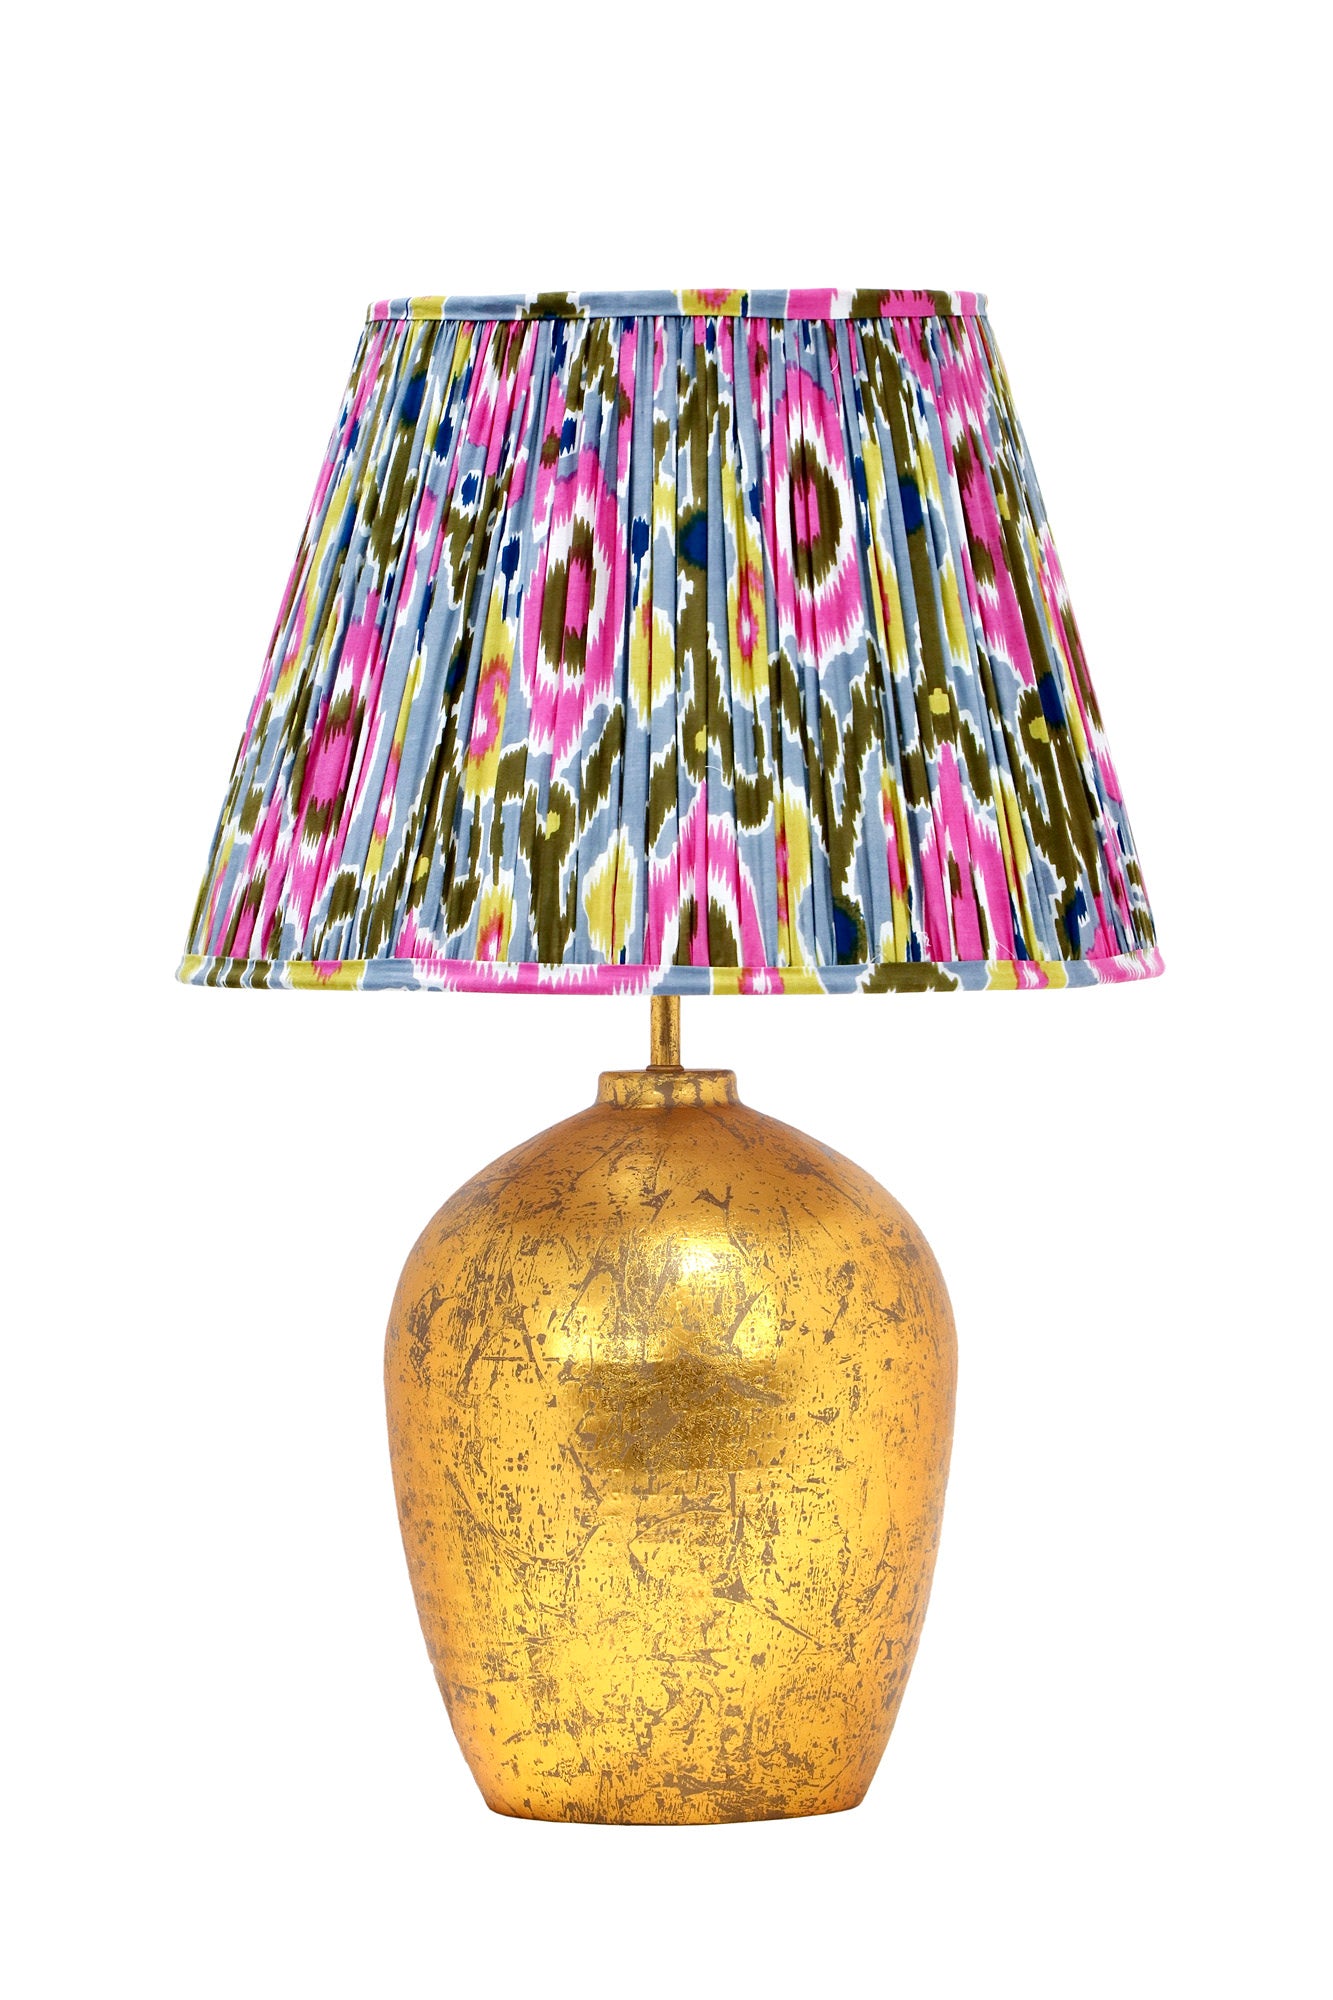 Chloe / Colorful Ikat Pleated Empire Lampshade